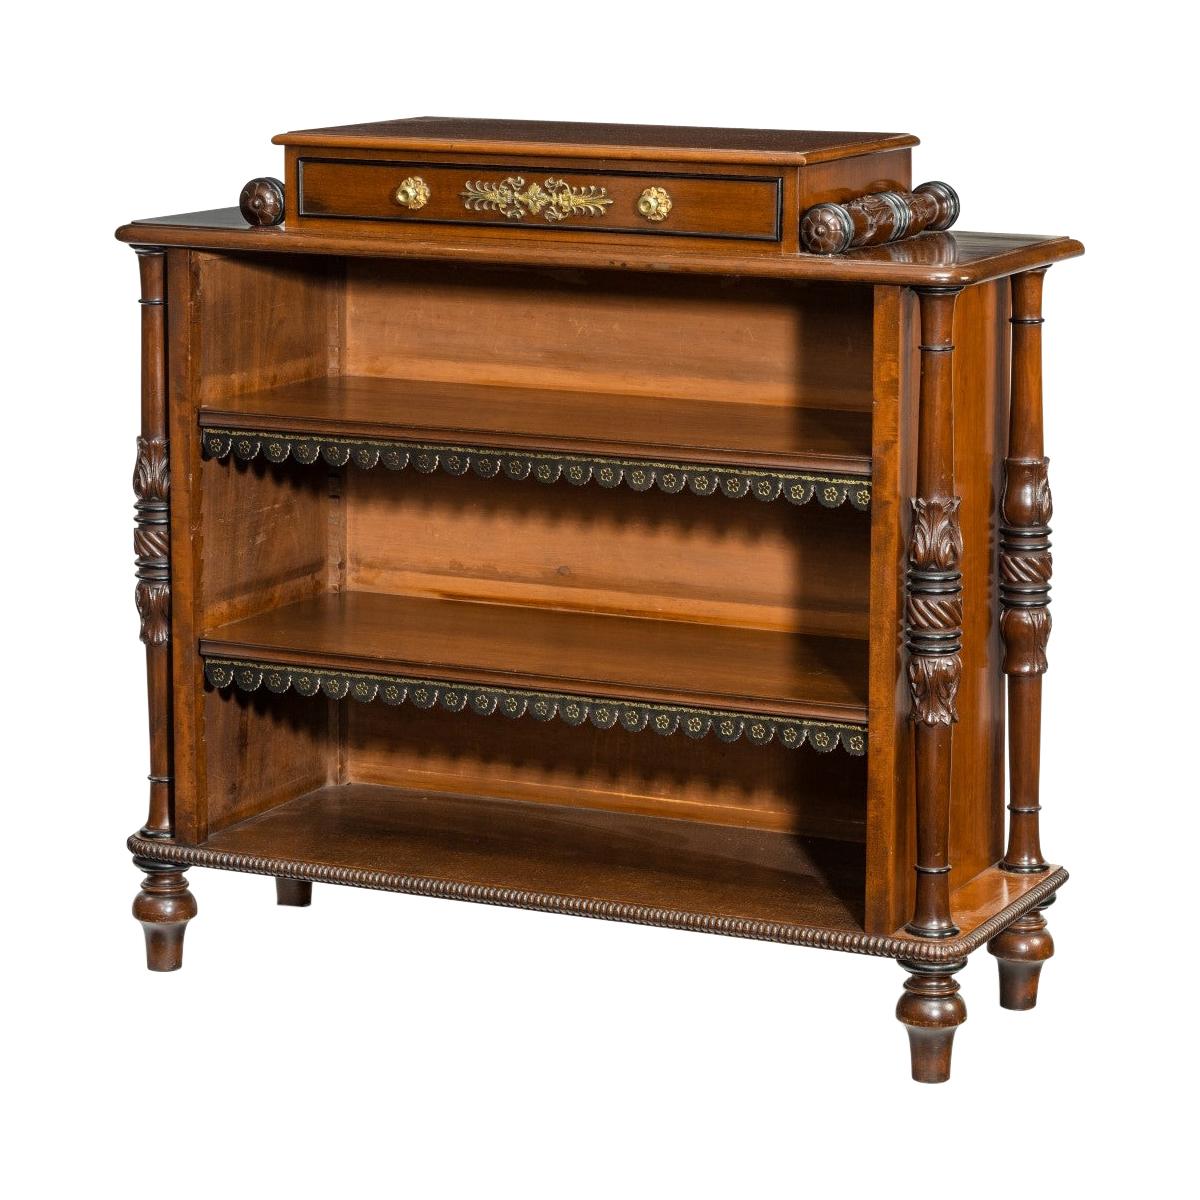 William IV Mahogany Open Bookcase by Brown and Lamont